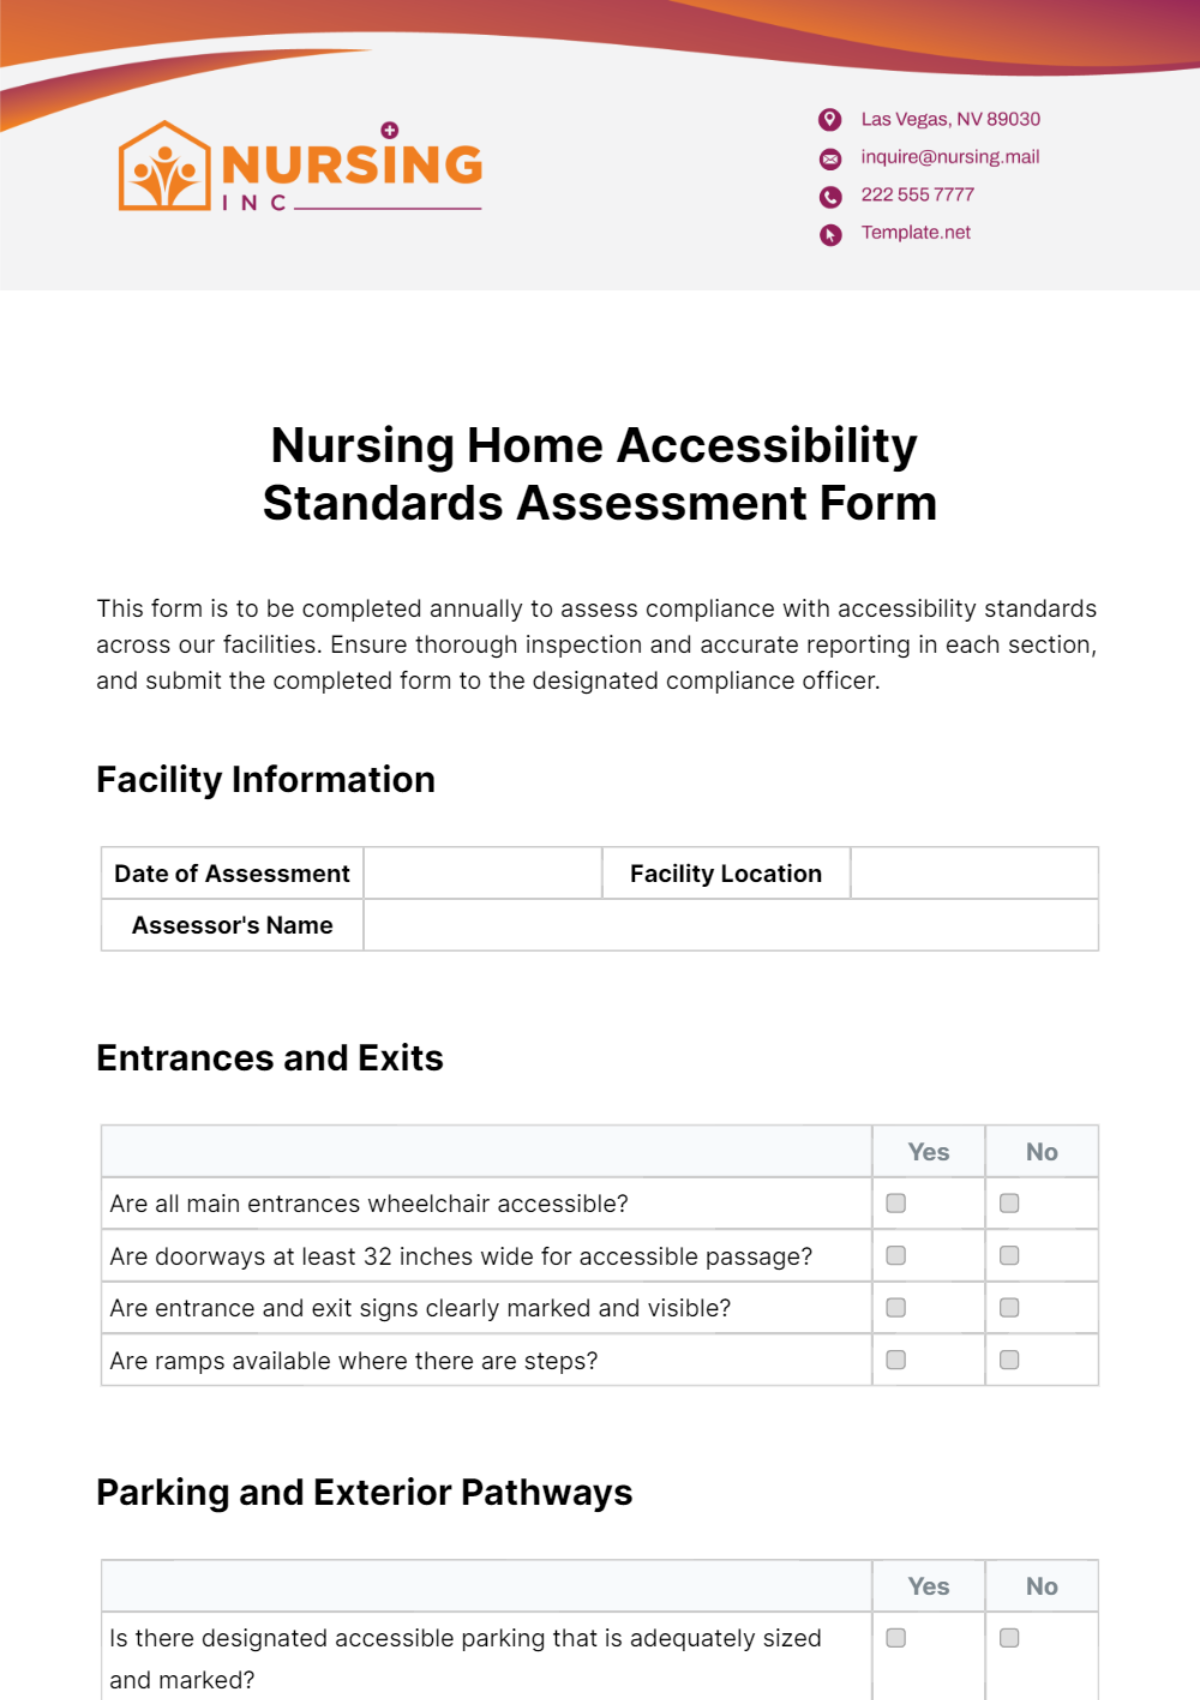 Nursing Home Accessibility Standards Assessment Form Template